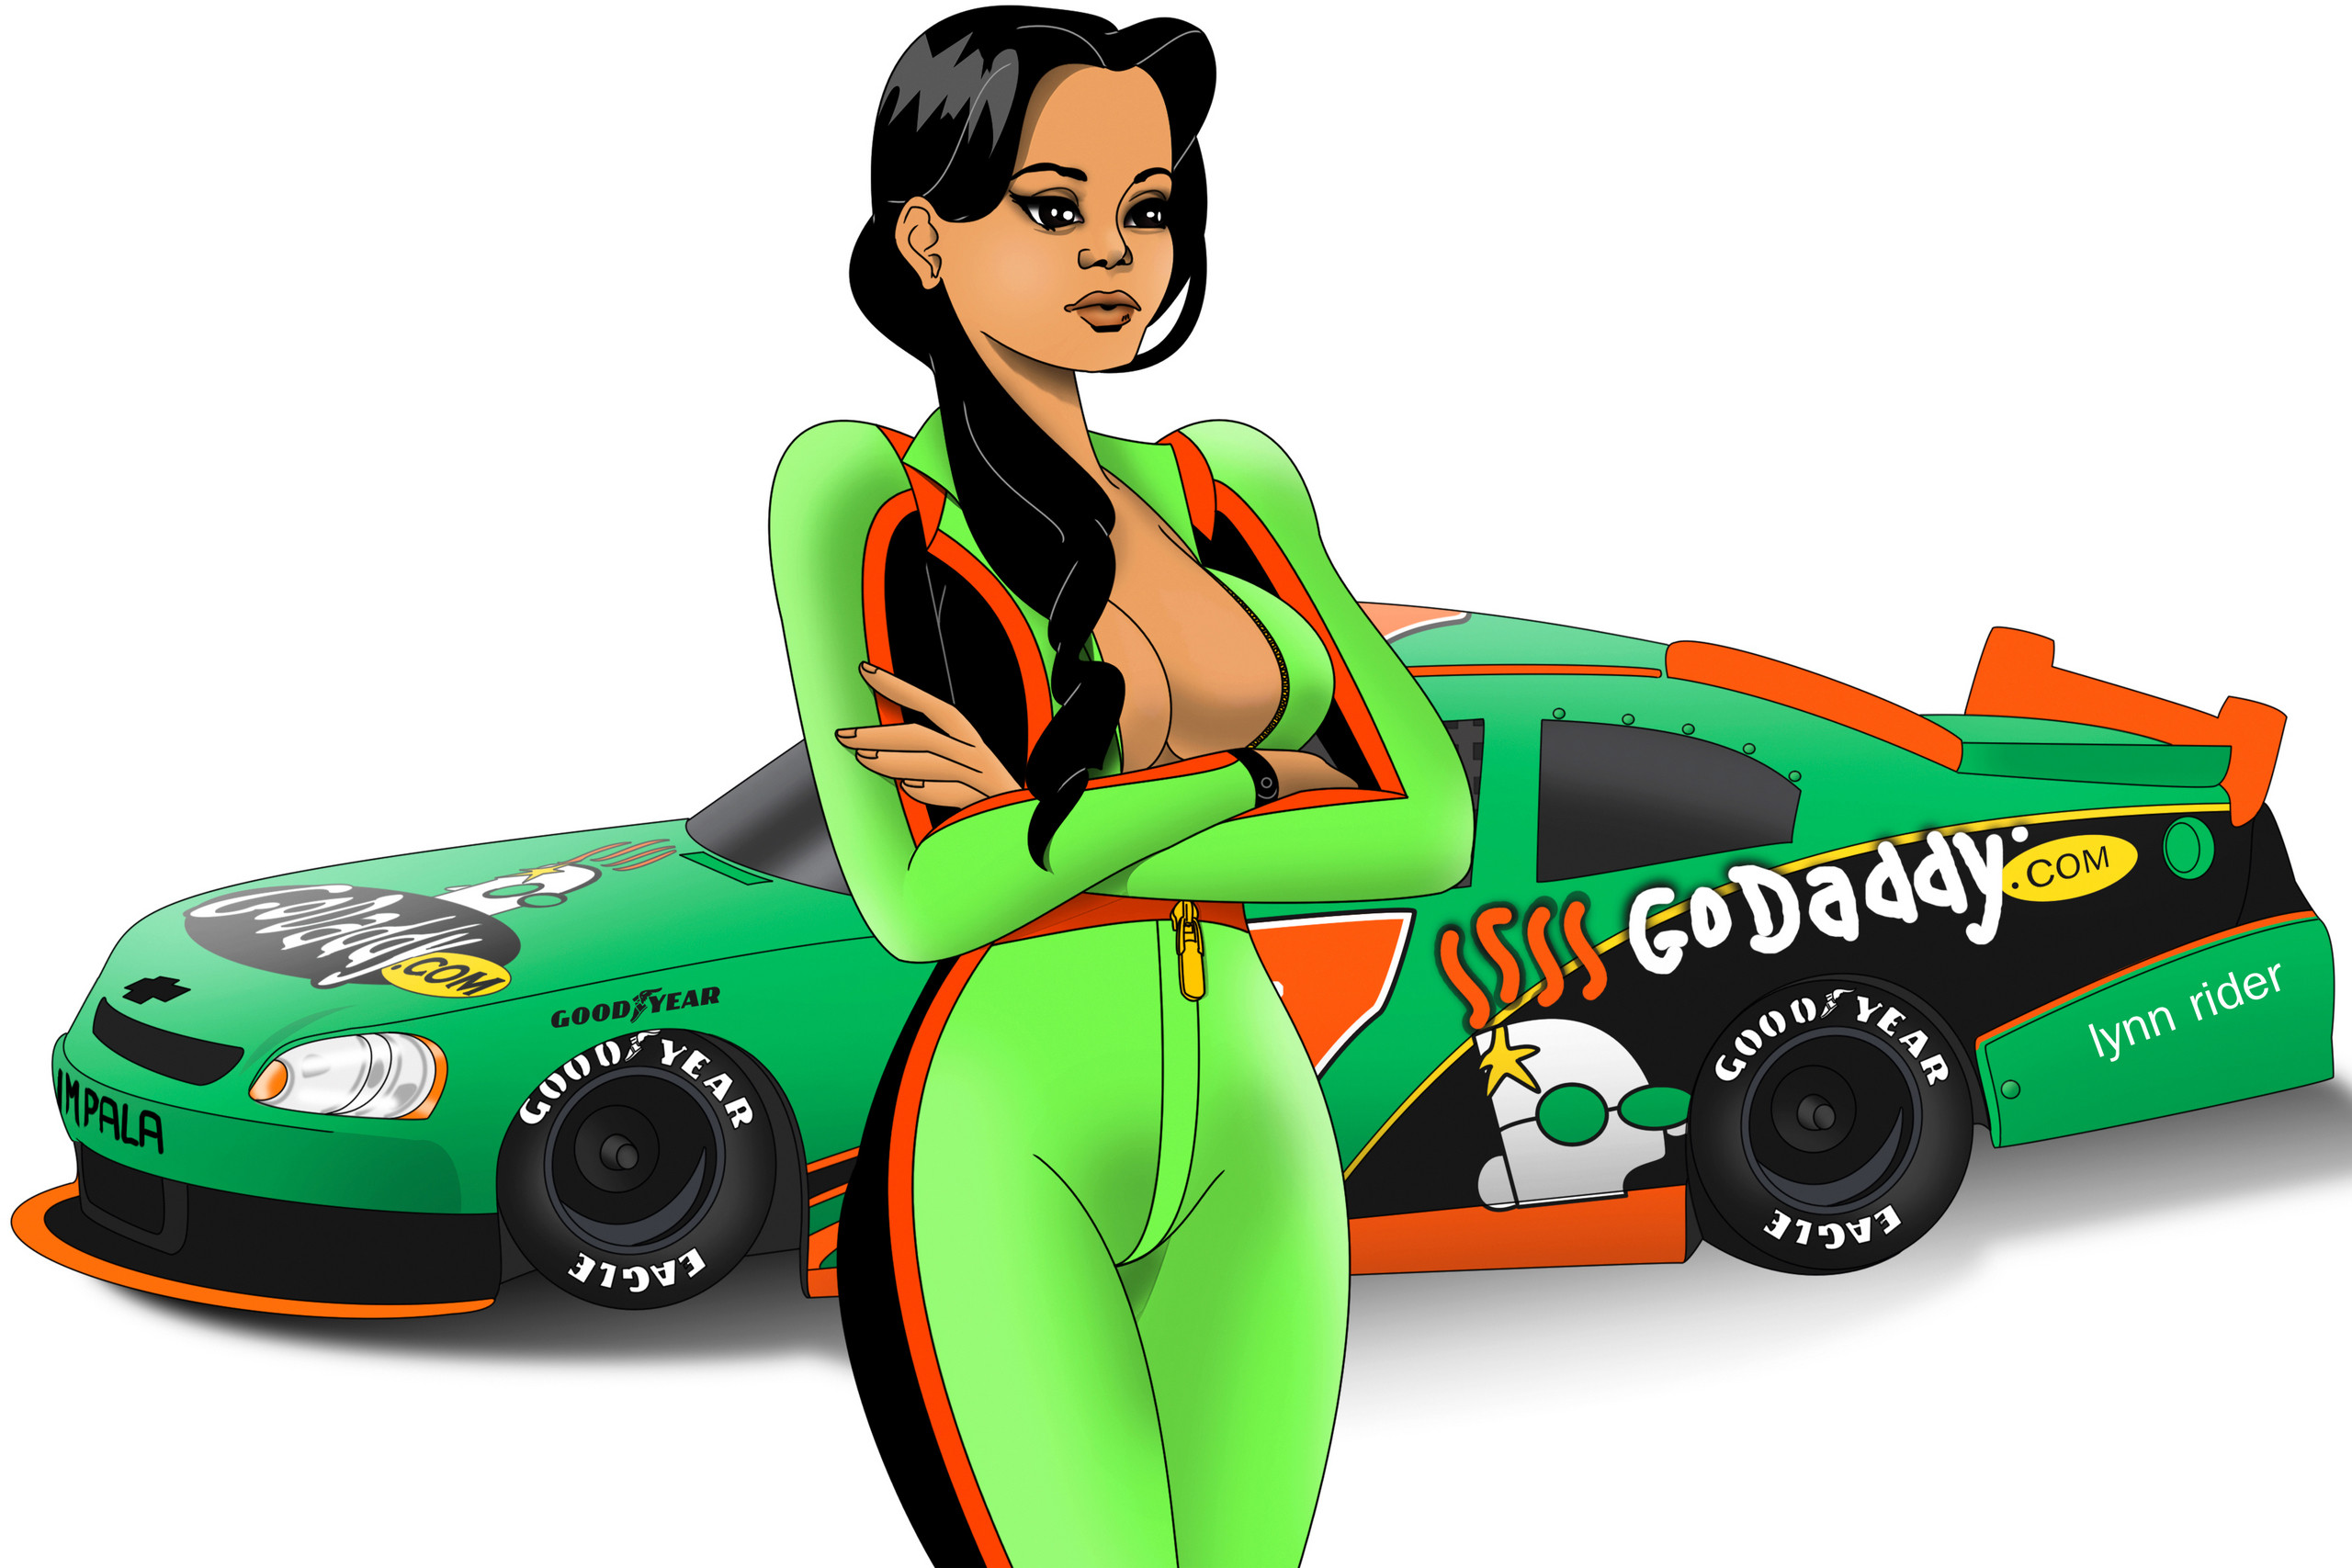 Danica Patrick images go daddy danica HD wallpaper and background photos